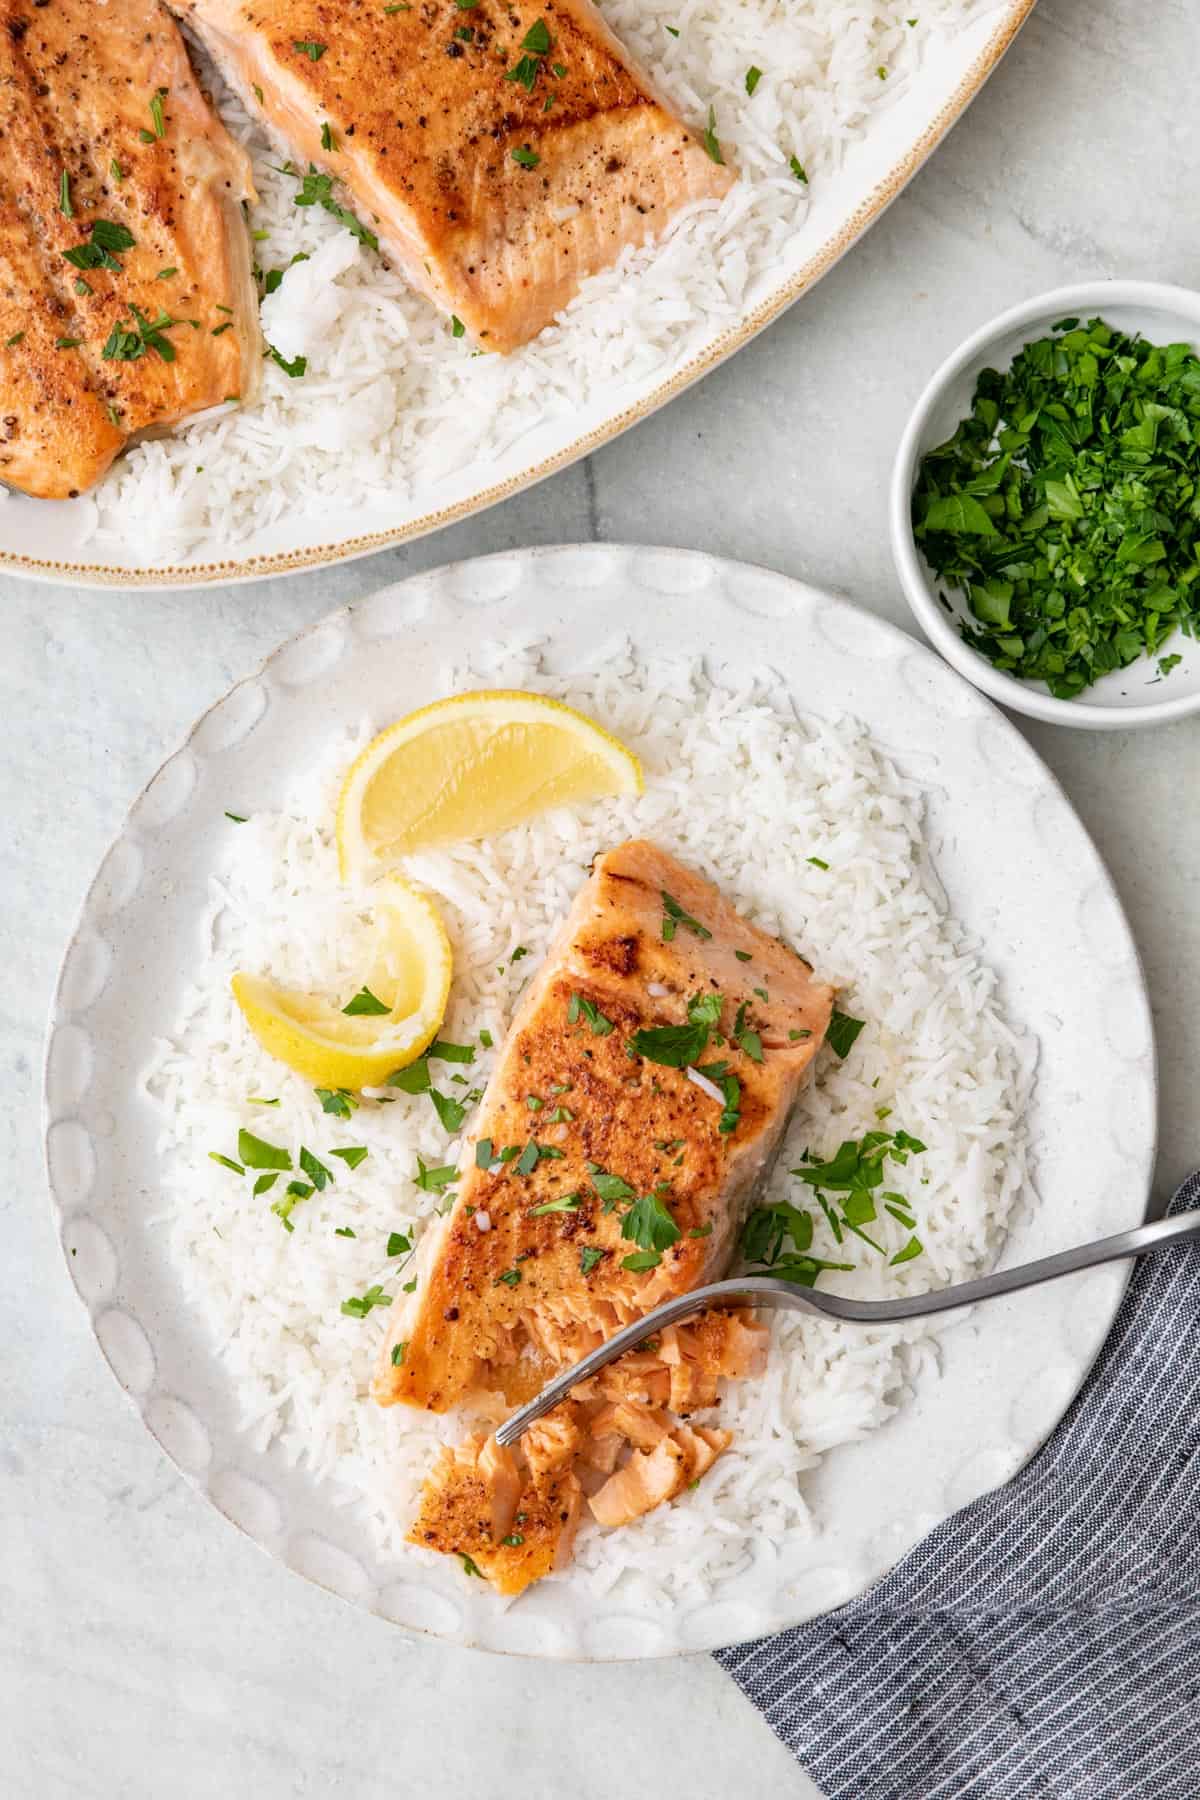 One salmon served over rice on a small serving plate with platter nearby ganished with lemon and parsley.